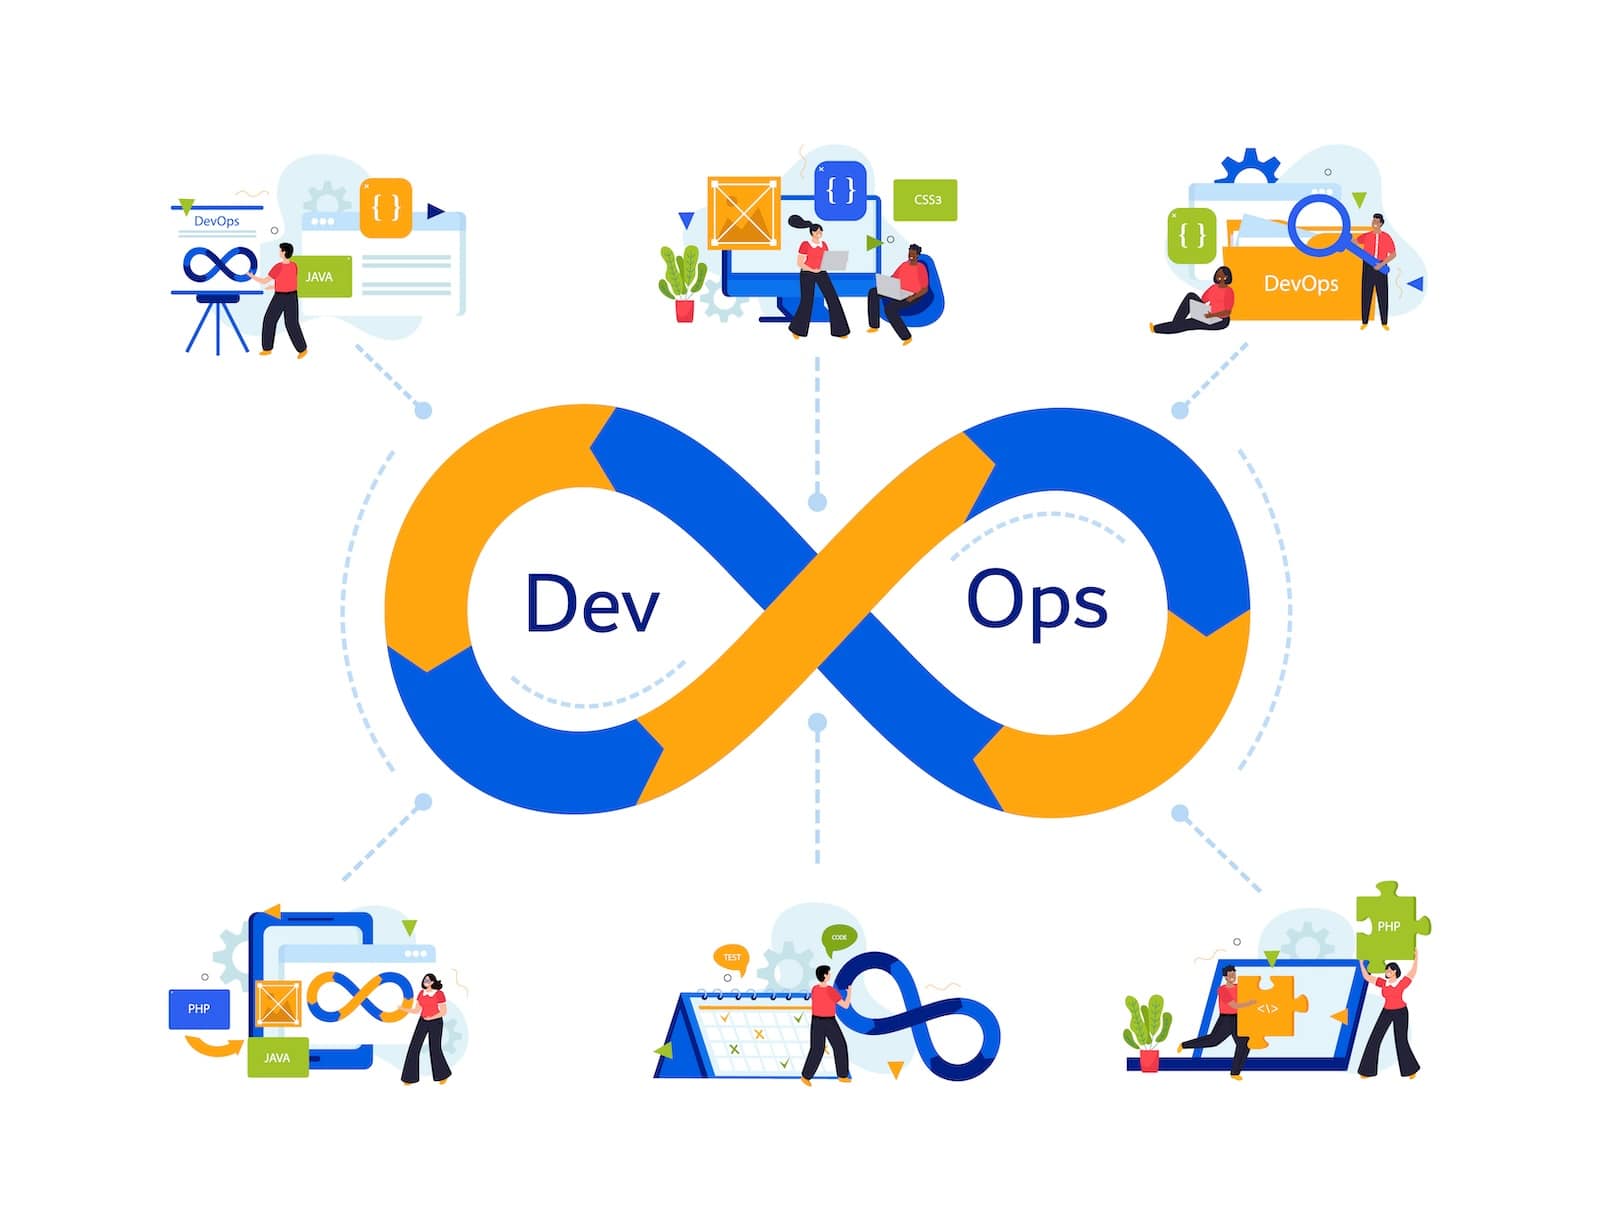 DevOps Mastery: The Next Phase of Operations and Development Starts Now with 10+ Tips